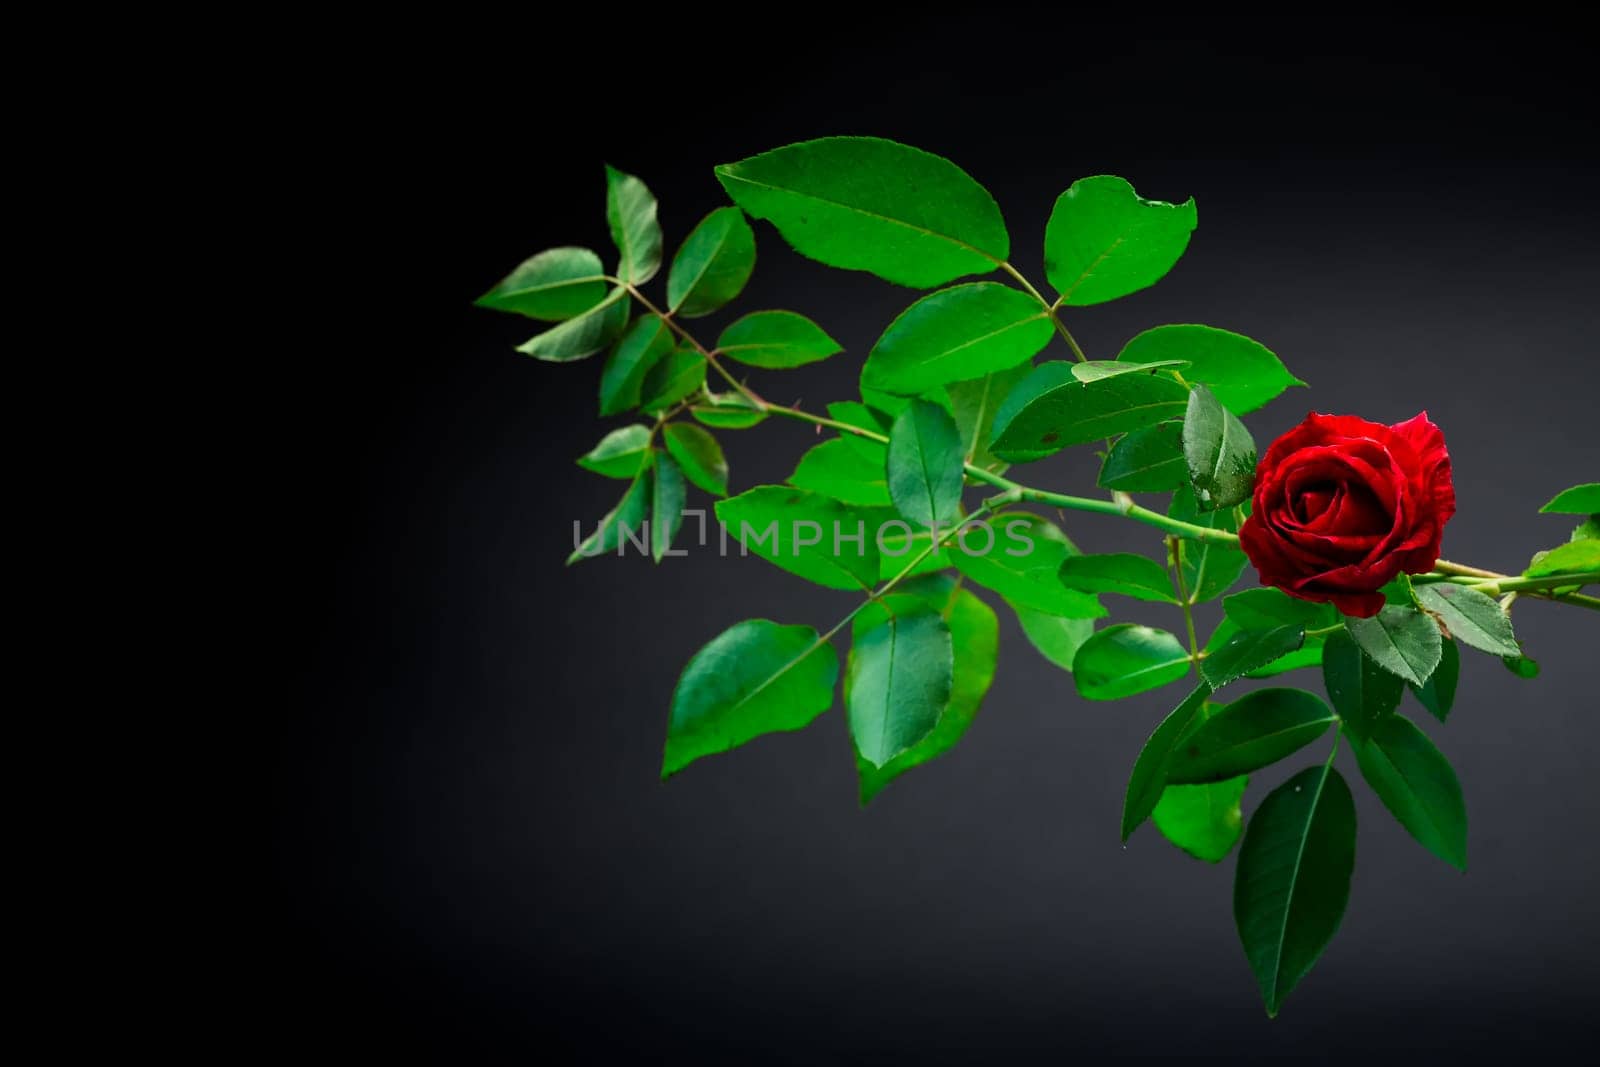 Red rose on a branch with foliage on a black background. by Rawlik